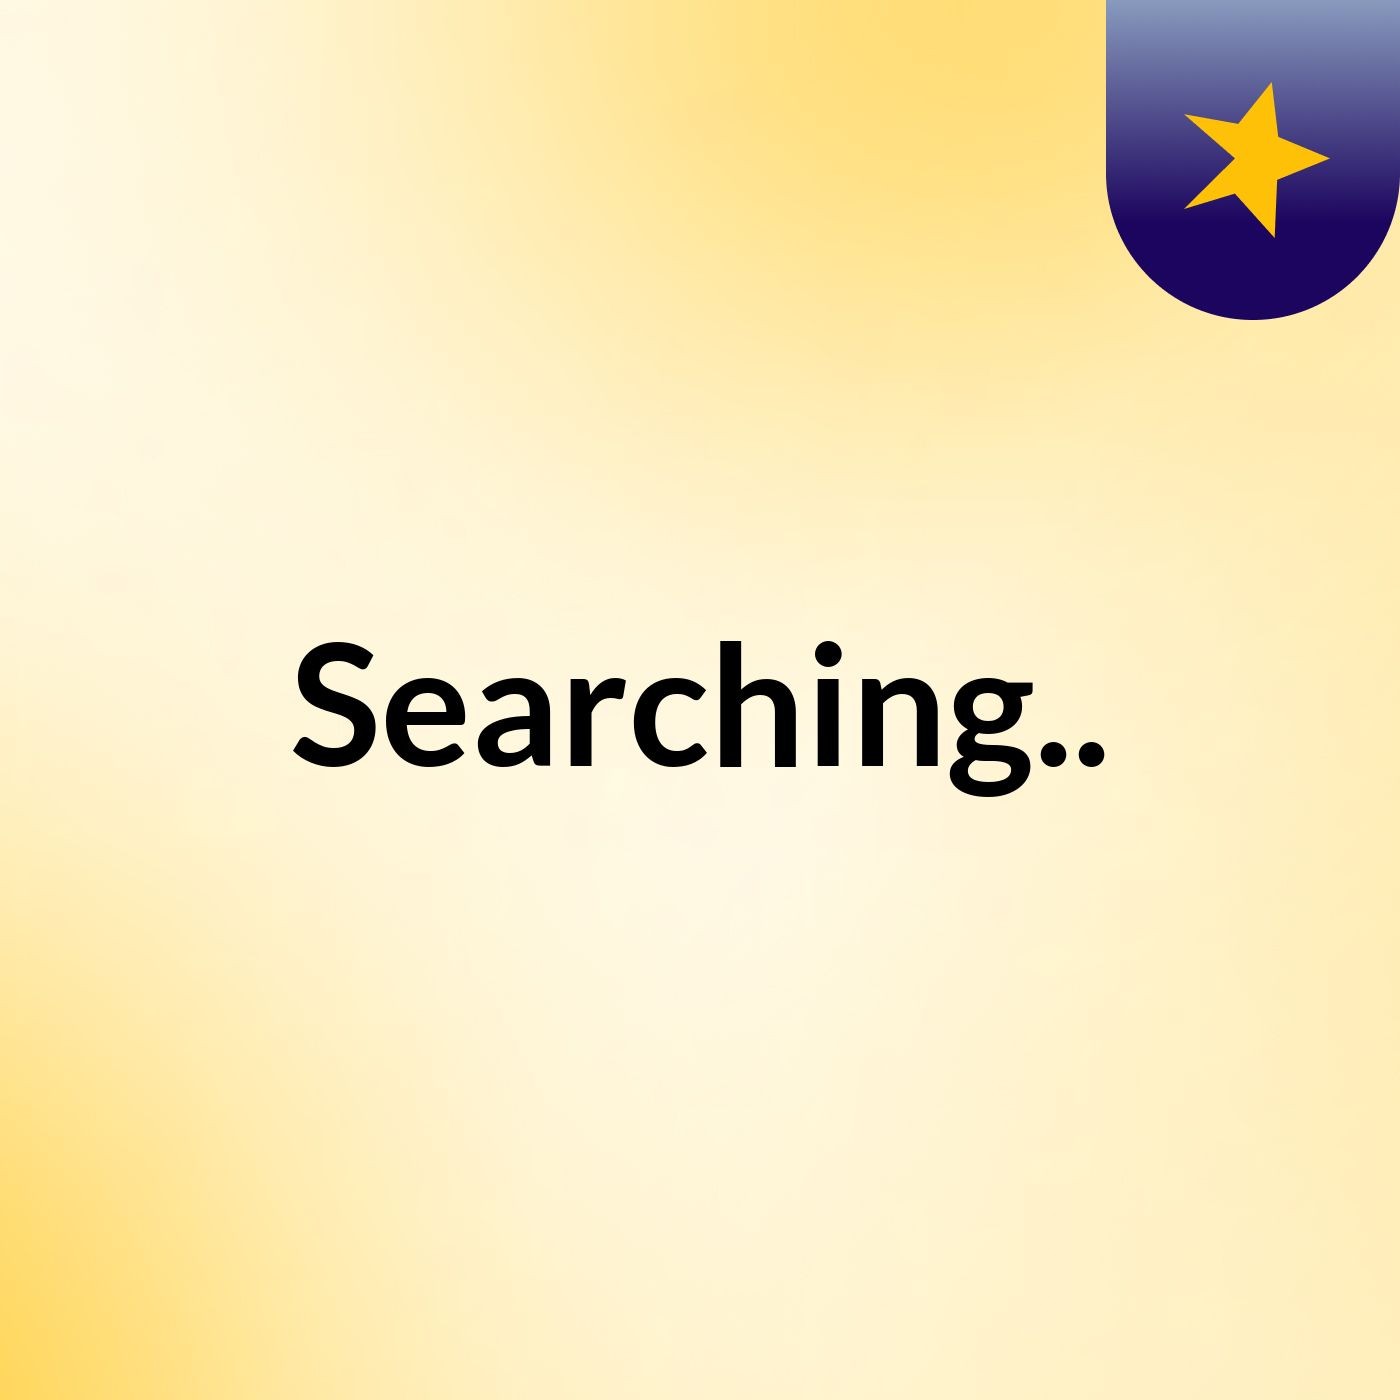 Searching..